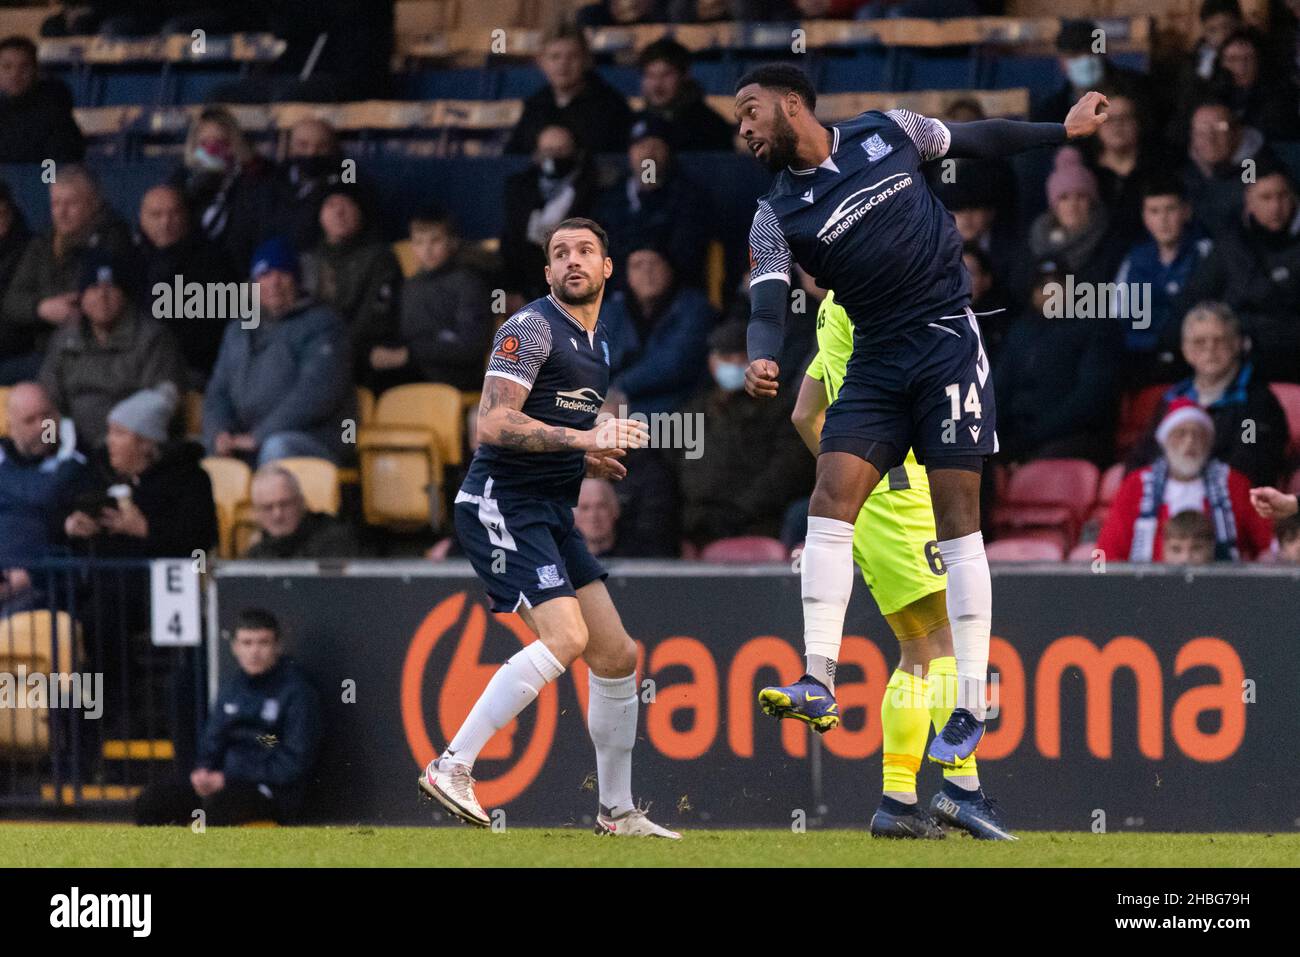 Nathan Ferguson playing for Southend in the FA Trophy 3rd round at Roots Hall, Southend United v Dorking Wanderers football match. Challenging header Stock Photo